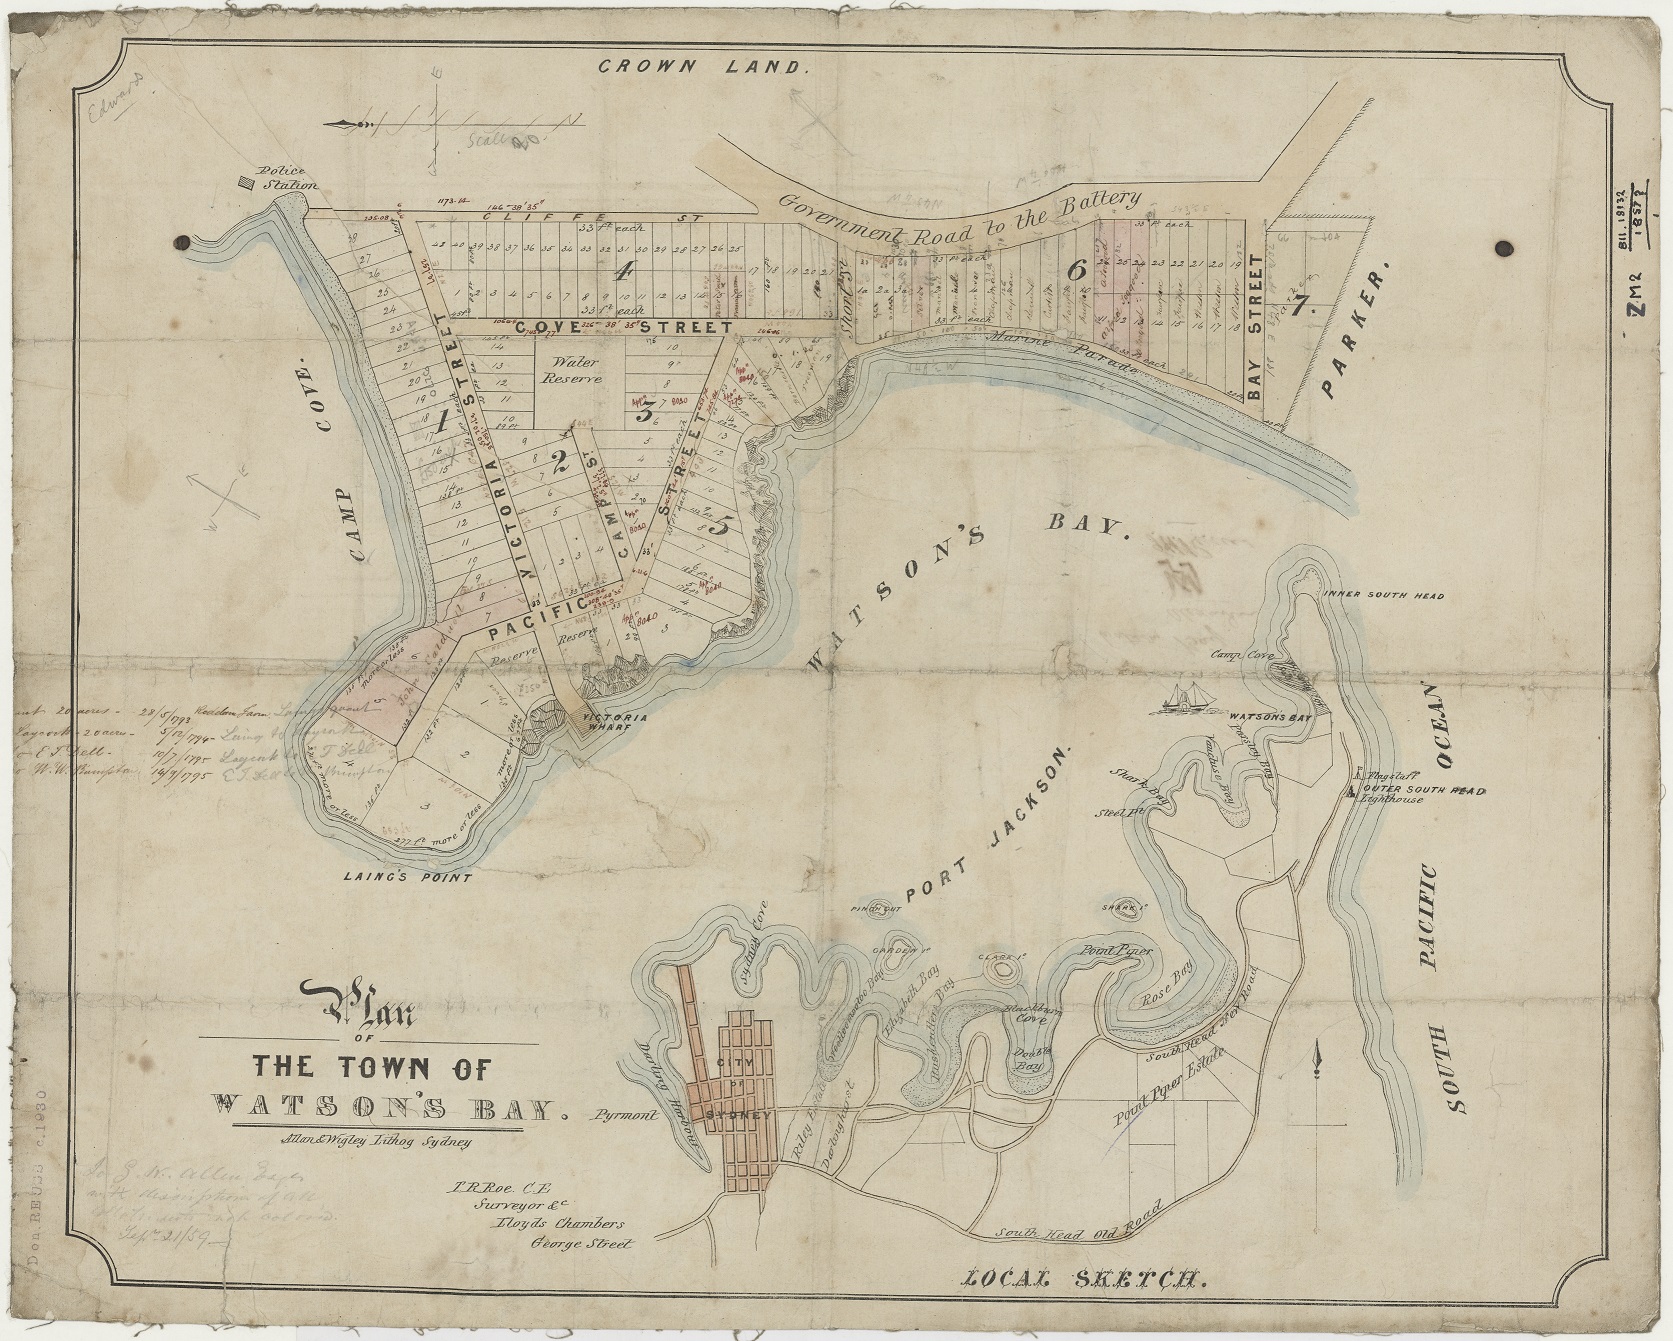 Plan of the town of Watsons Bay c1857. From the collections of the State Library of New South Wales Ref: FL3712591